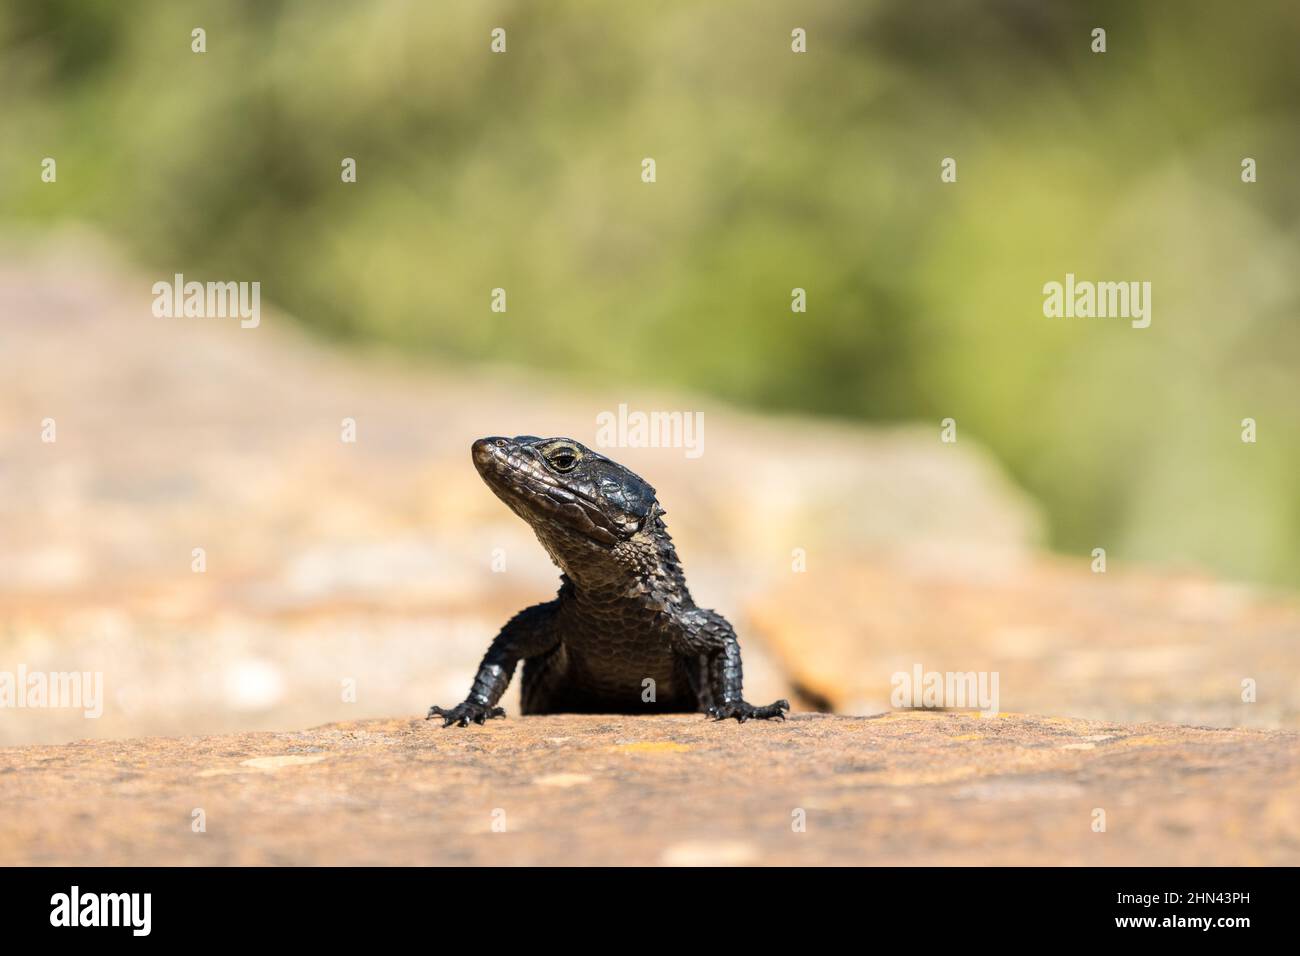 Black girdled lizard (Cordylus niger) showing face and head while on a rock at Cape Point, Western Cape, South Africa Stock Photo